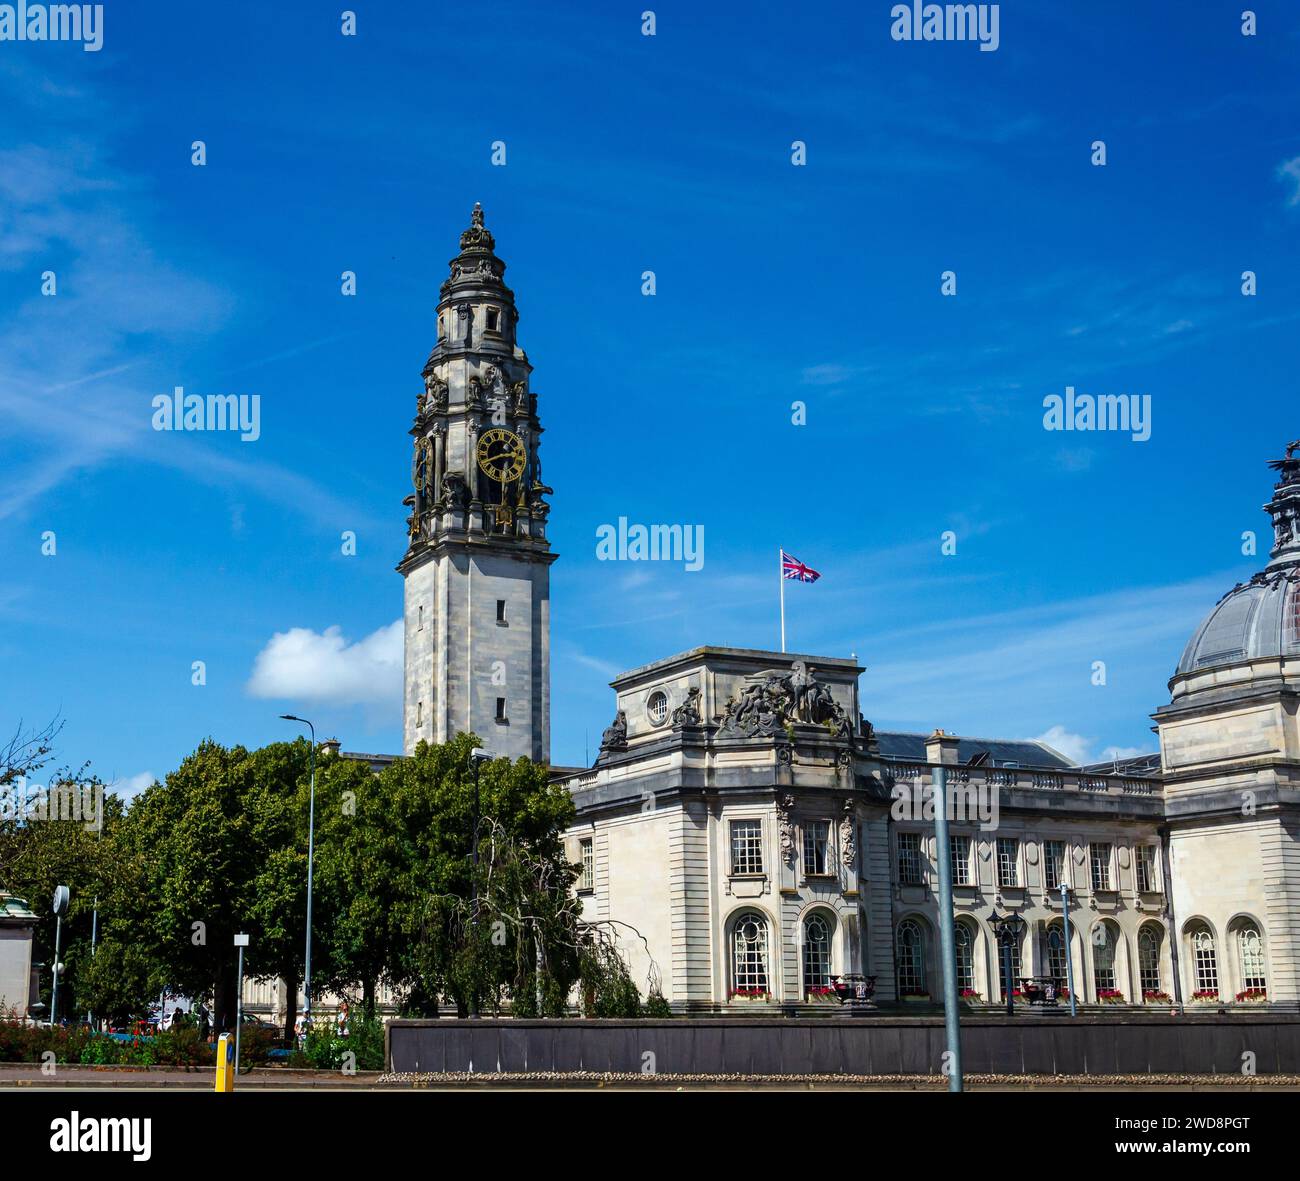 Cardiff, Glamorgan, Wales August 11 2023 - Cardiff City Hall with it's iconic four sided clock tower and gilded clock faces Stock Photo